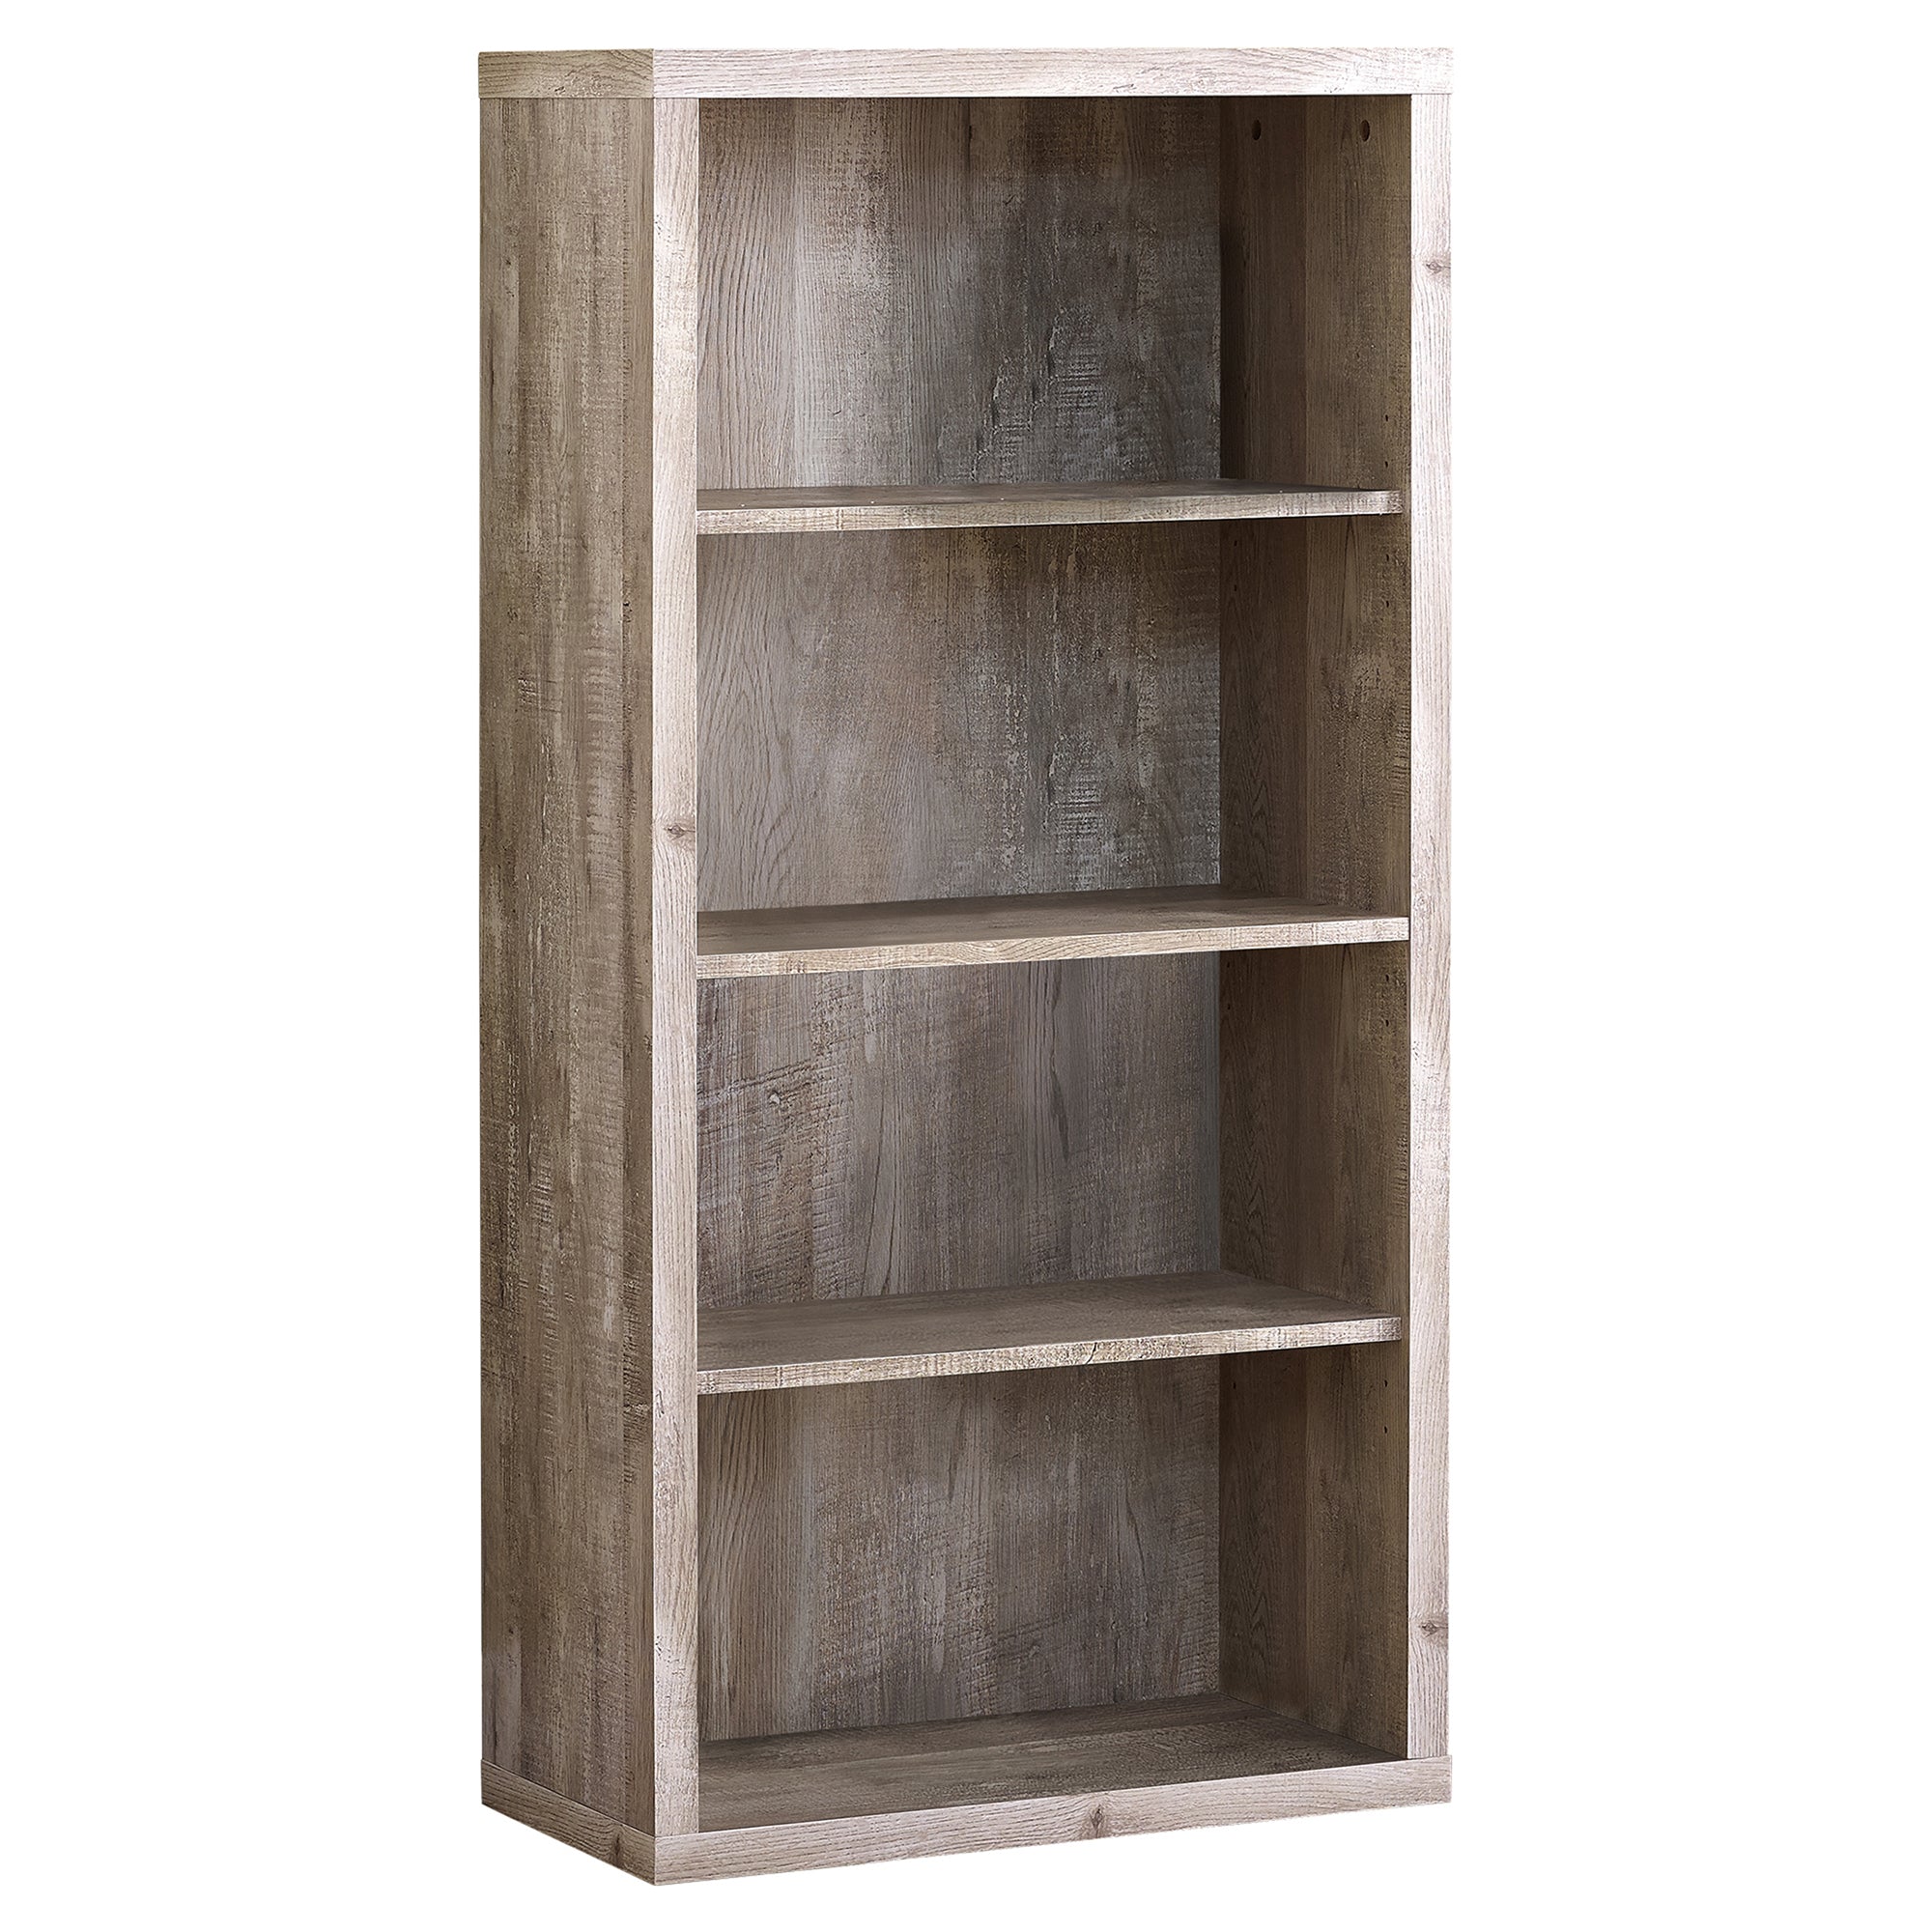 Bookcase - 48H / Taupe Reclaimed Wood-Look/ Adj. Shelves